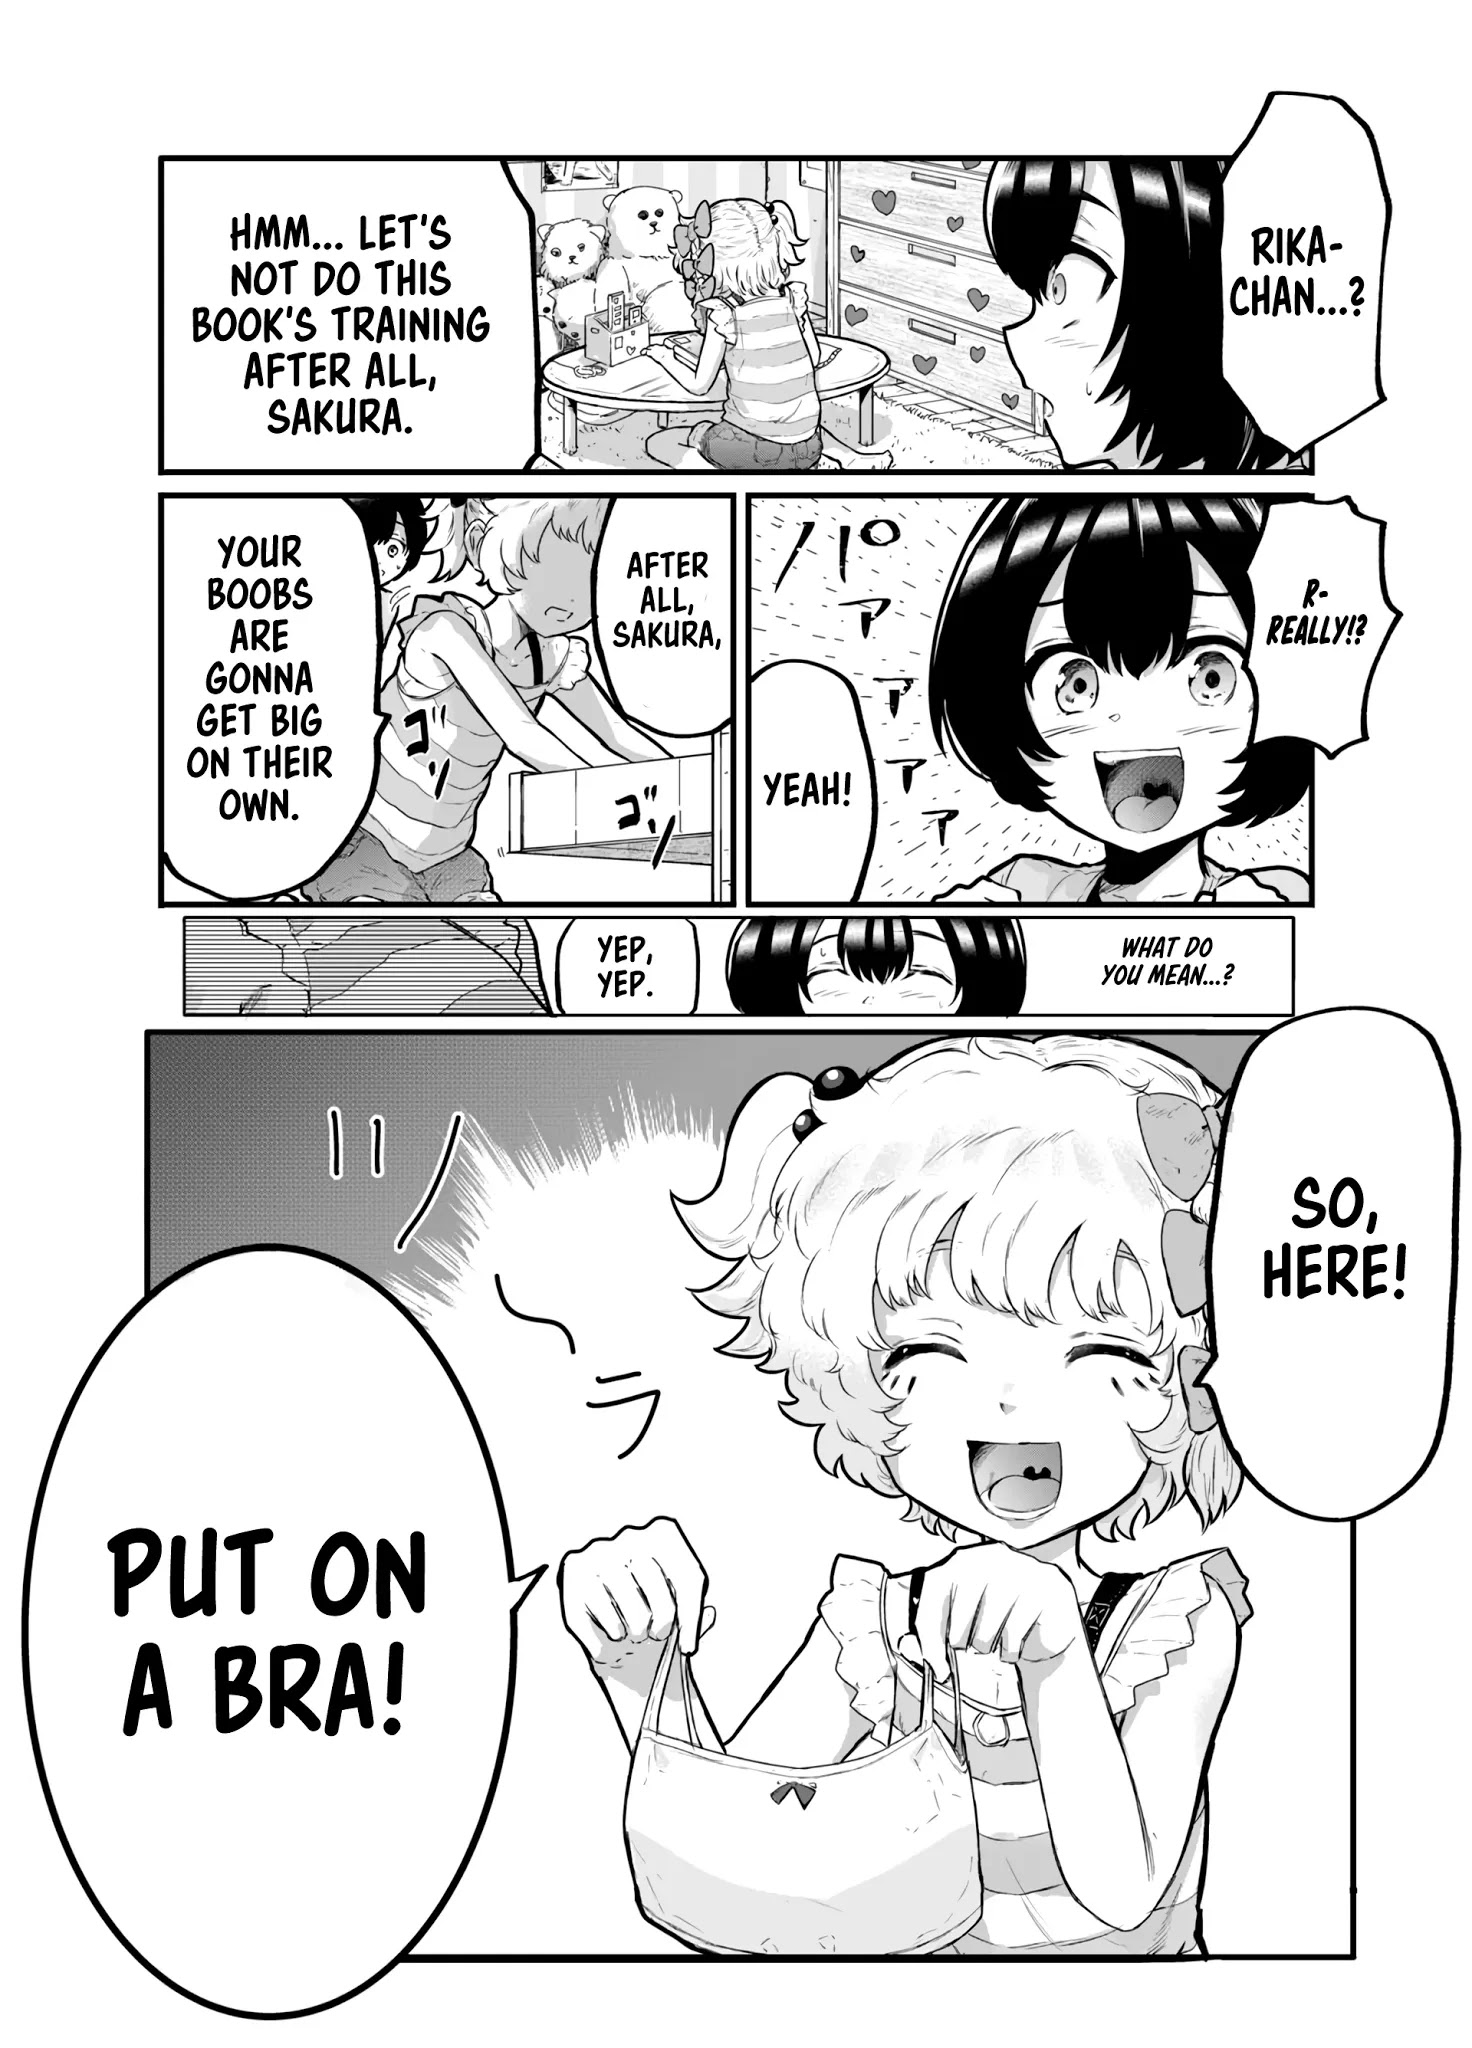 Show Me Your Boobs - Page 2